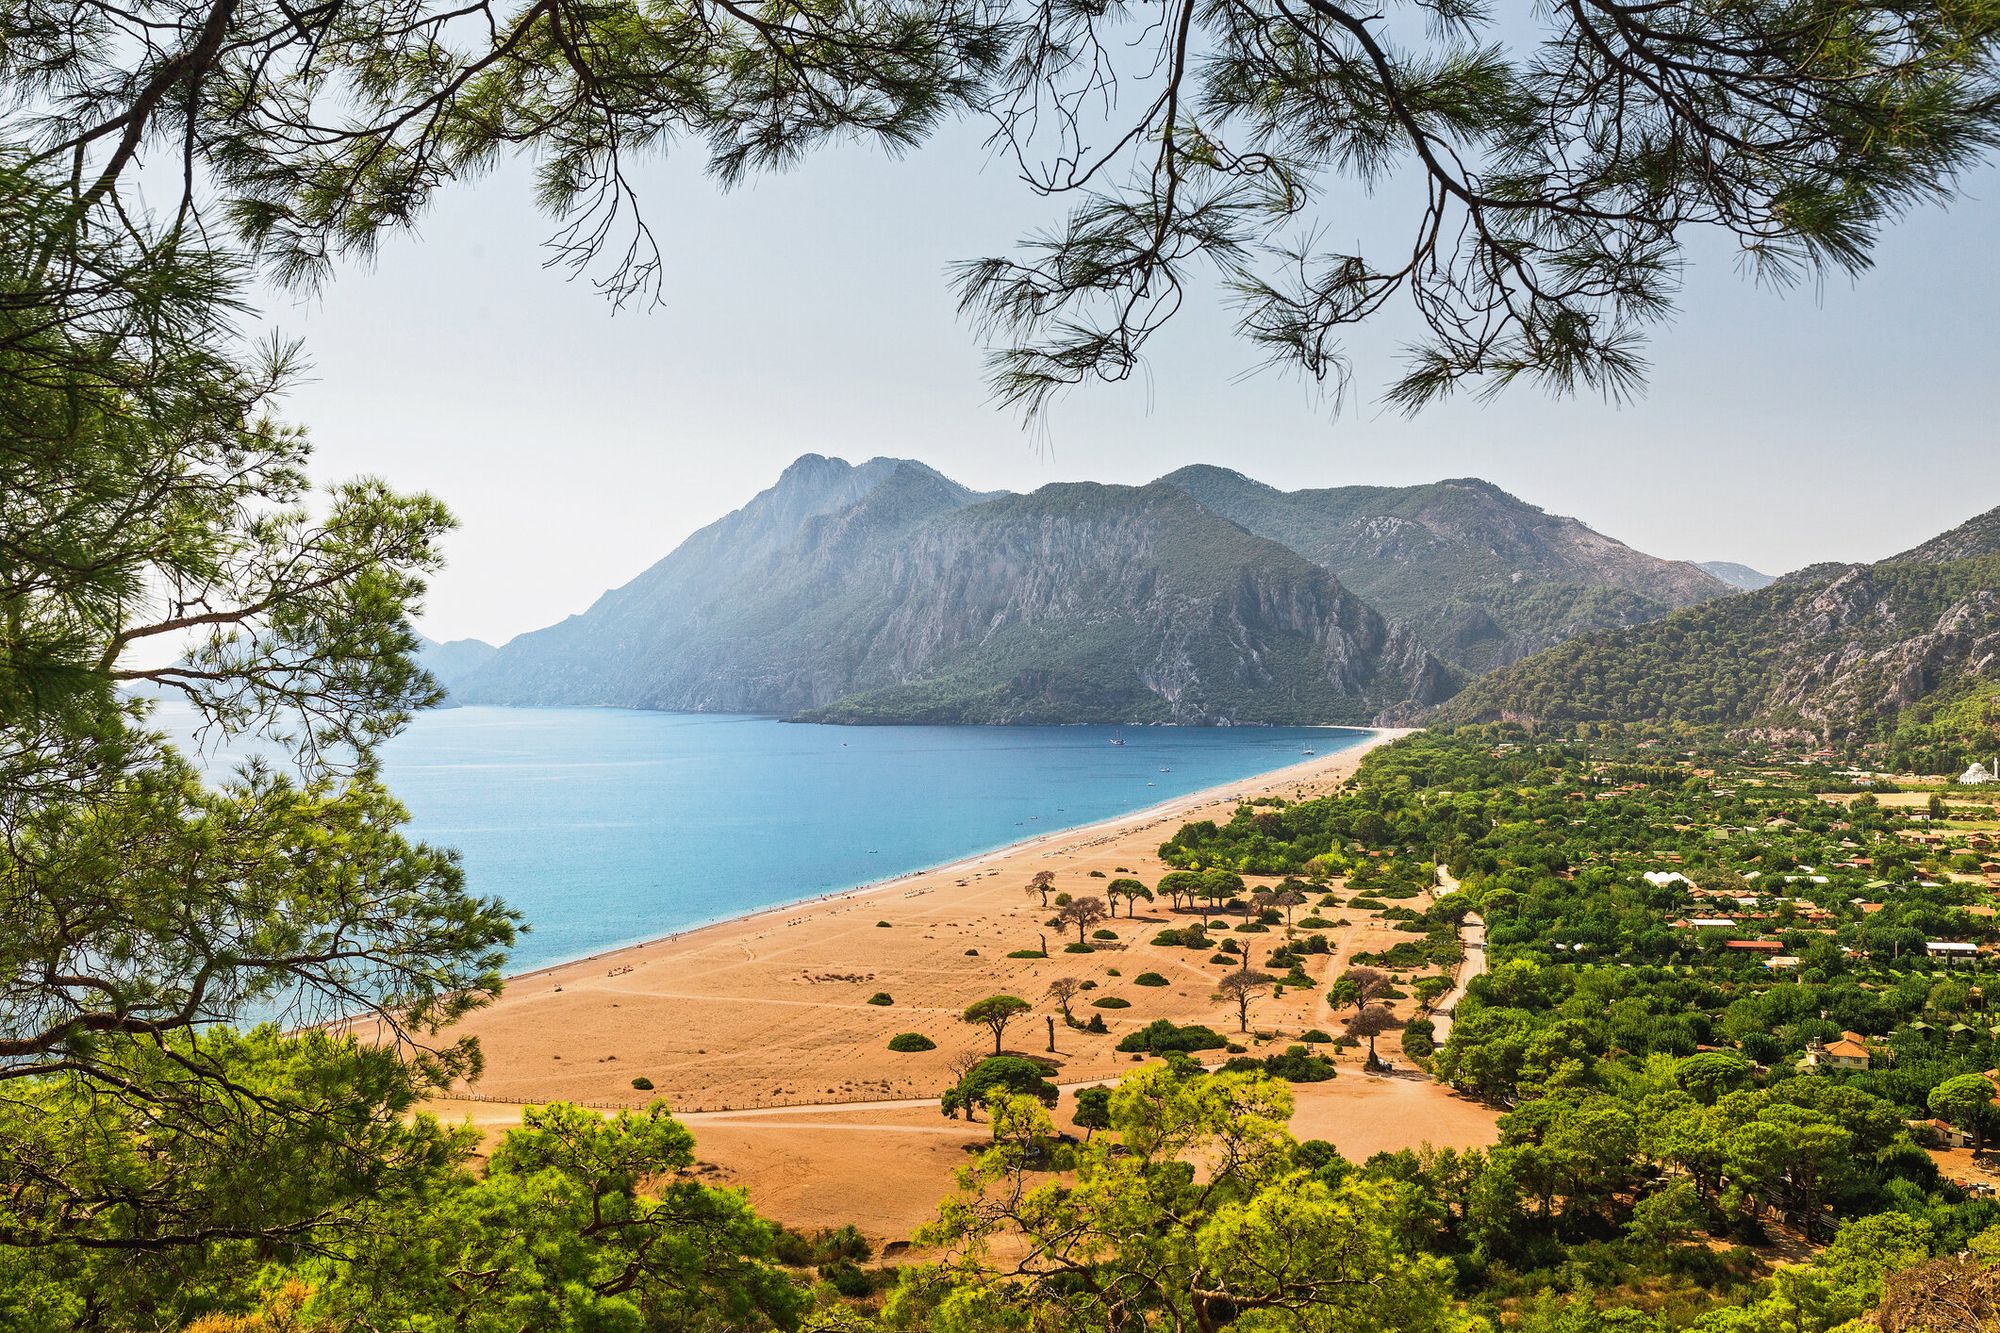 Aerial Panoramic View of One of the Most Beautiful Beaches in the World – Cirali or Chirali Near Antalya, Turkey Surrounded by Majestic Mountains and the Mediterranean Sea — Getty Images